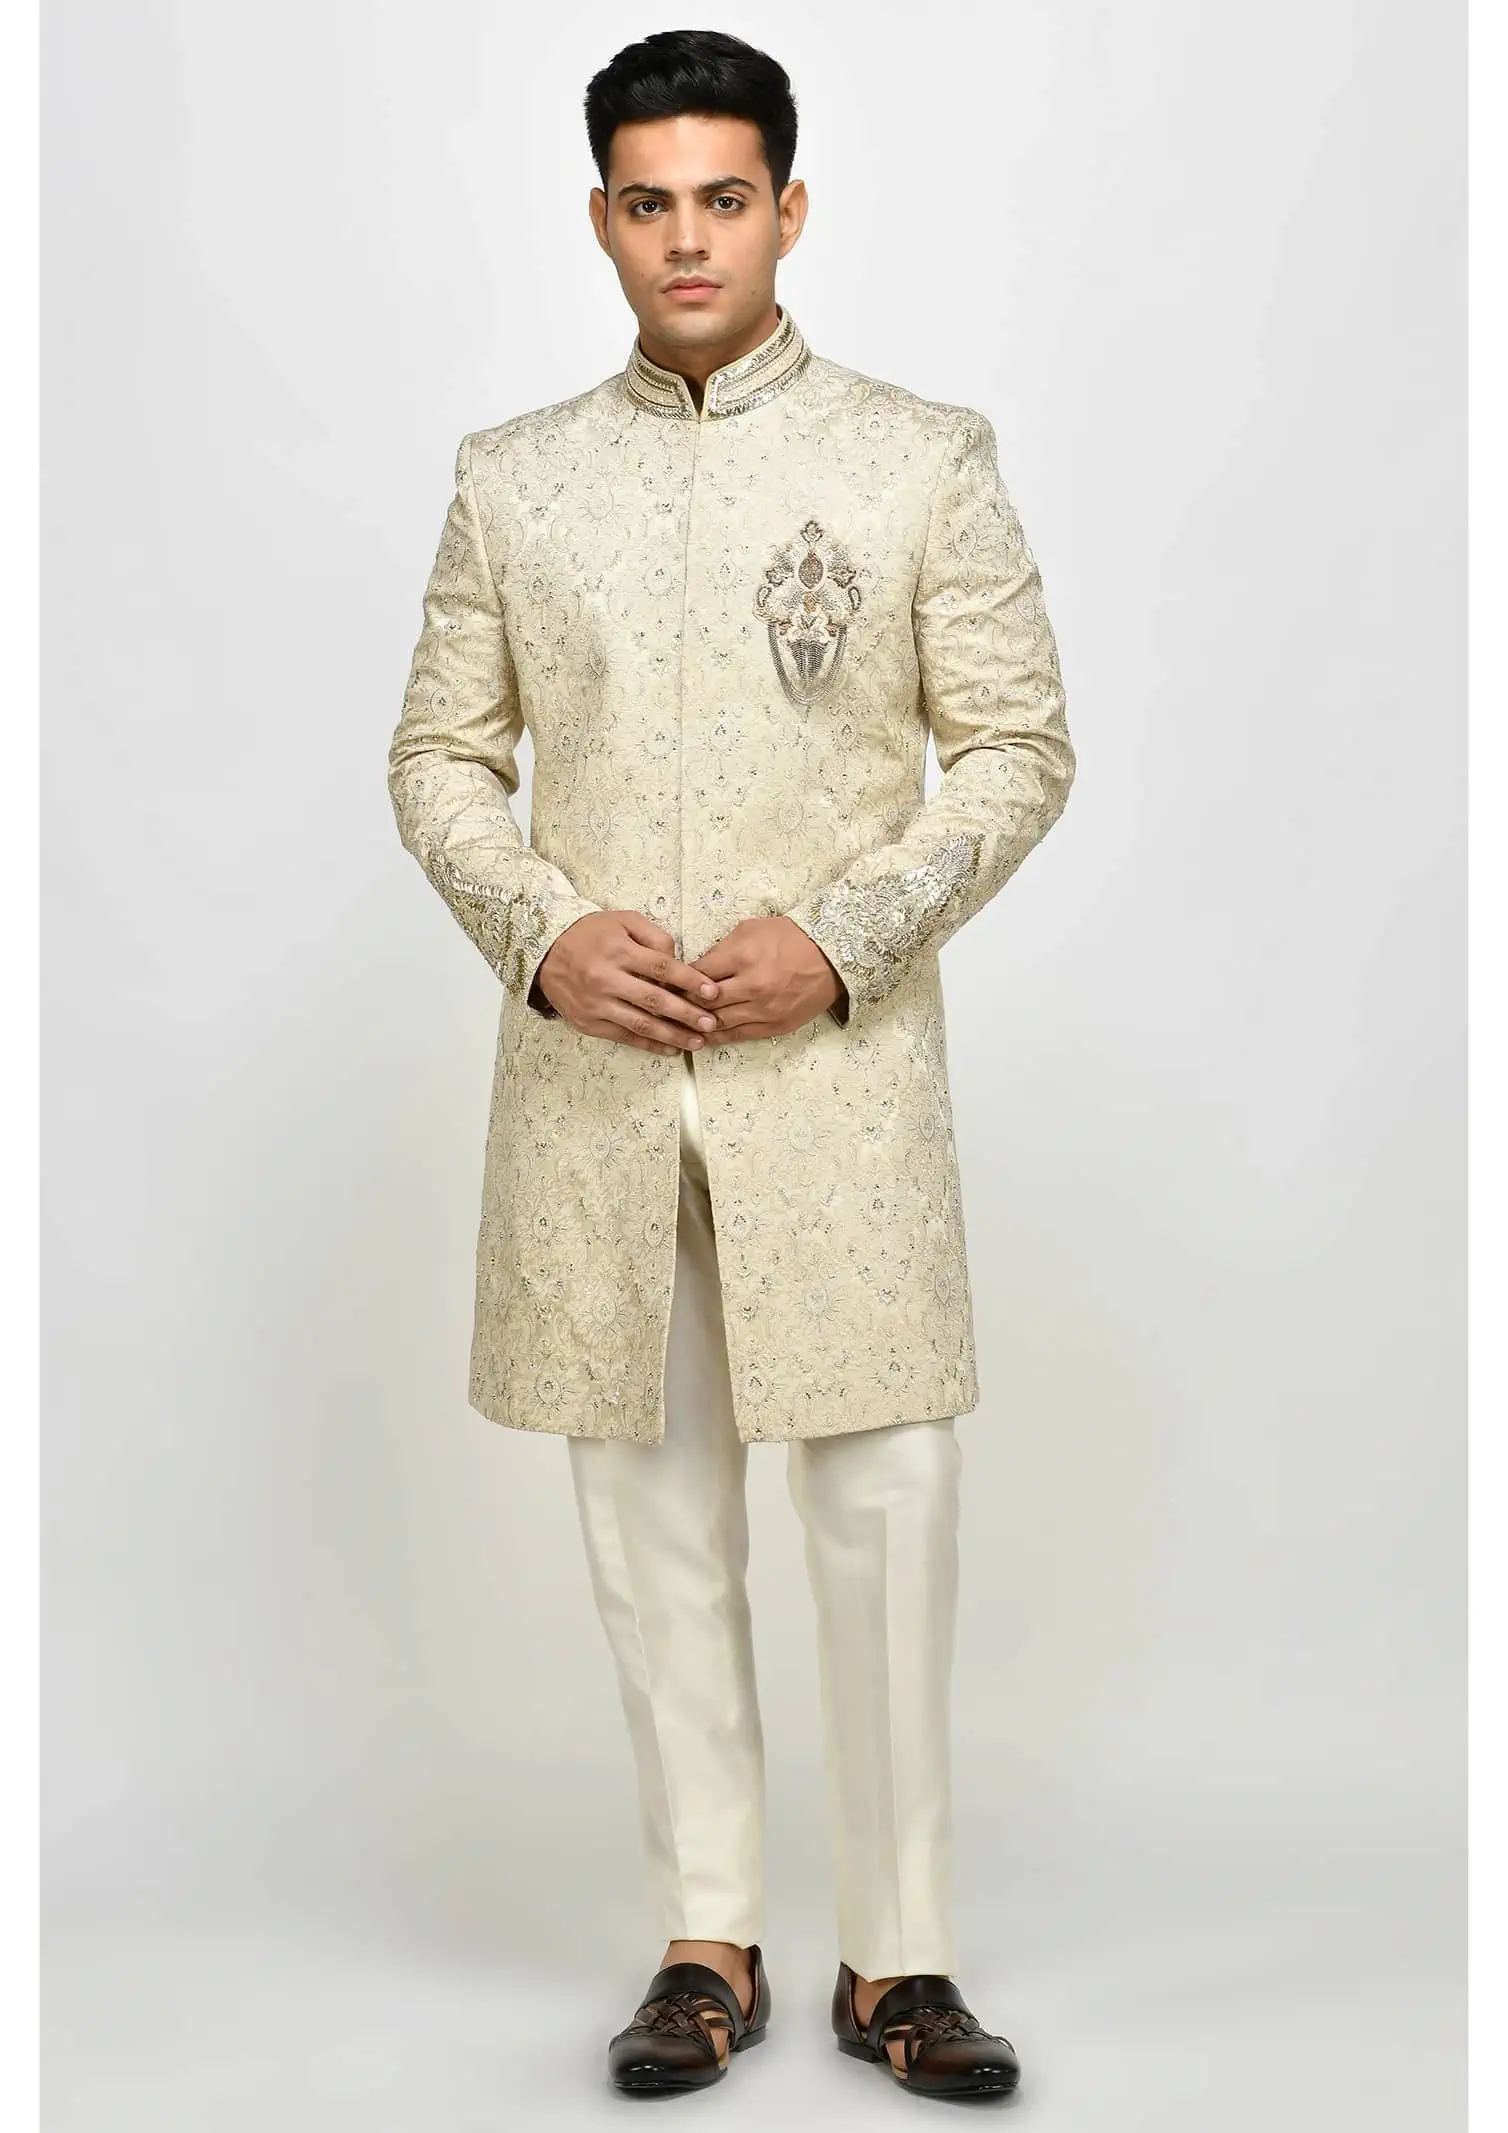 Baroque patterned embroidered Sherwani